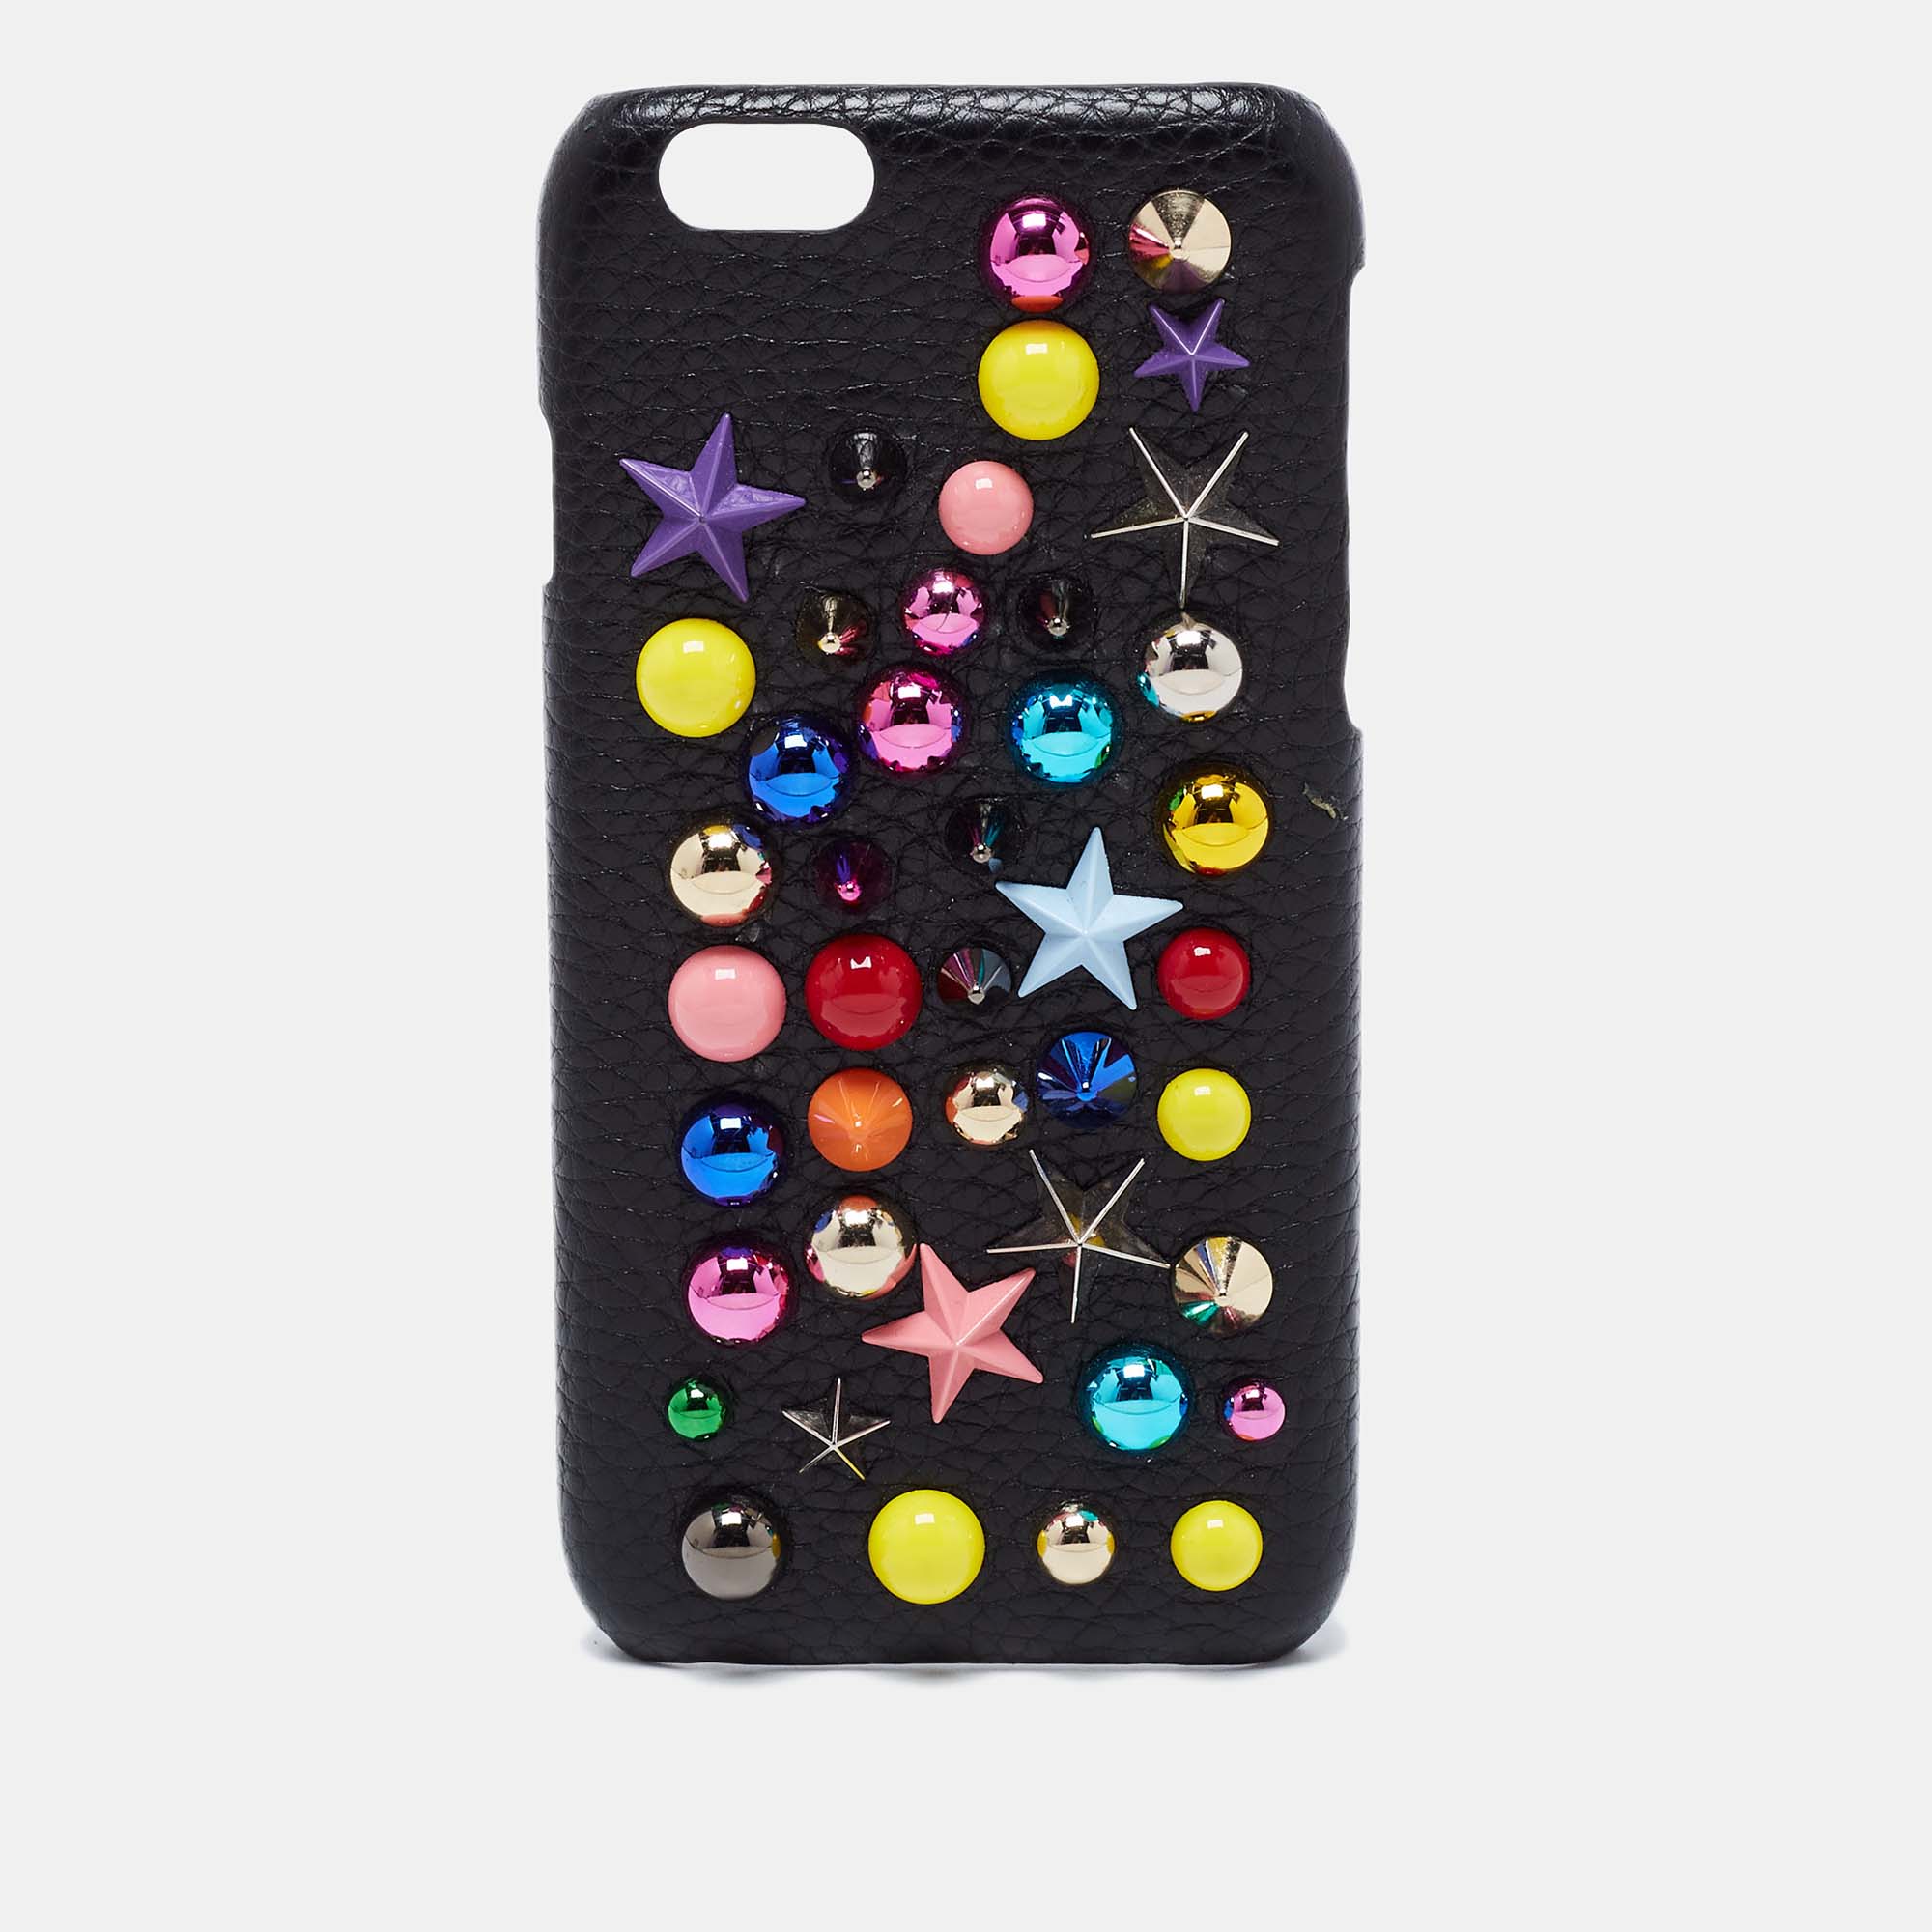 Pre-owned Dolce & Gabbana Black Leather Embellished Iphone 6 Cover